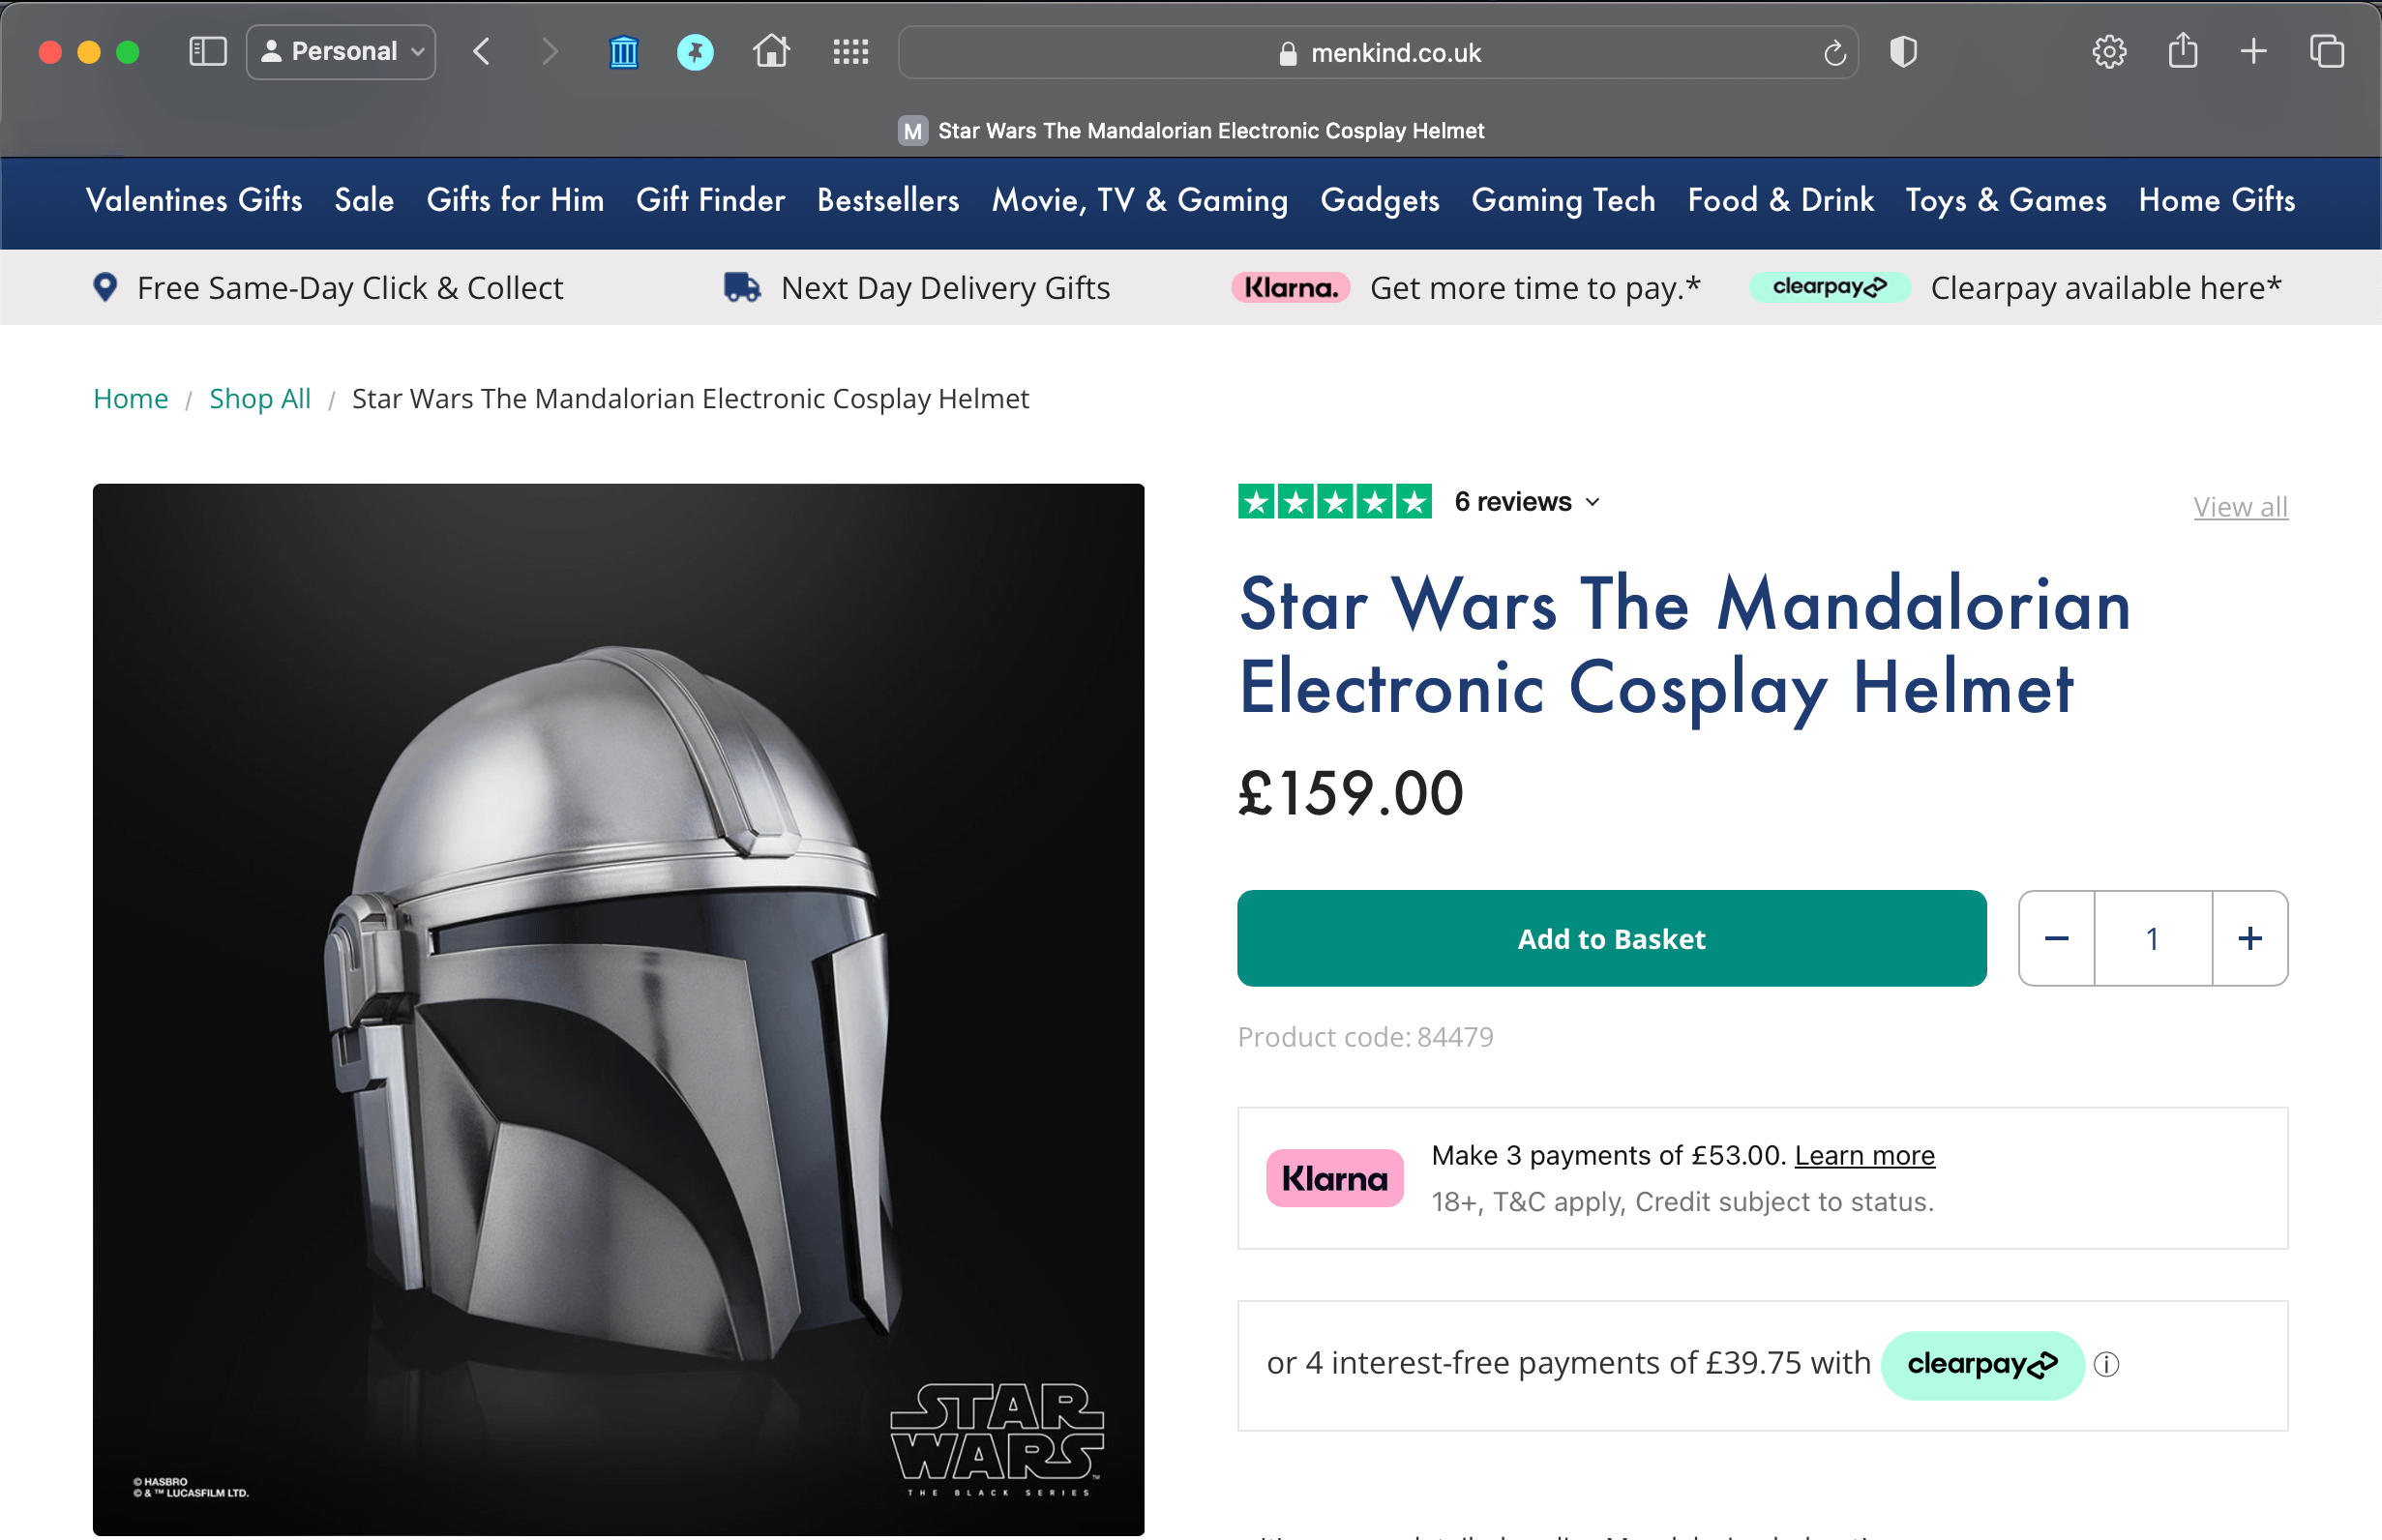 Hoping for this Helmet :-)